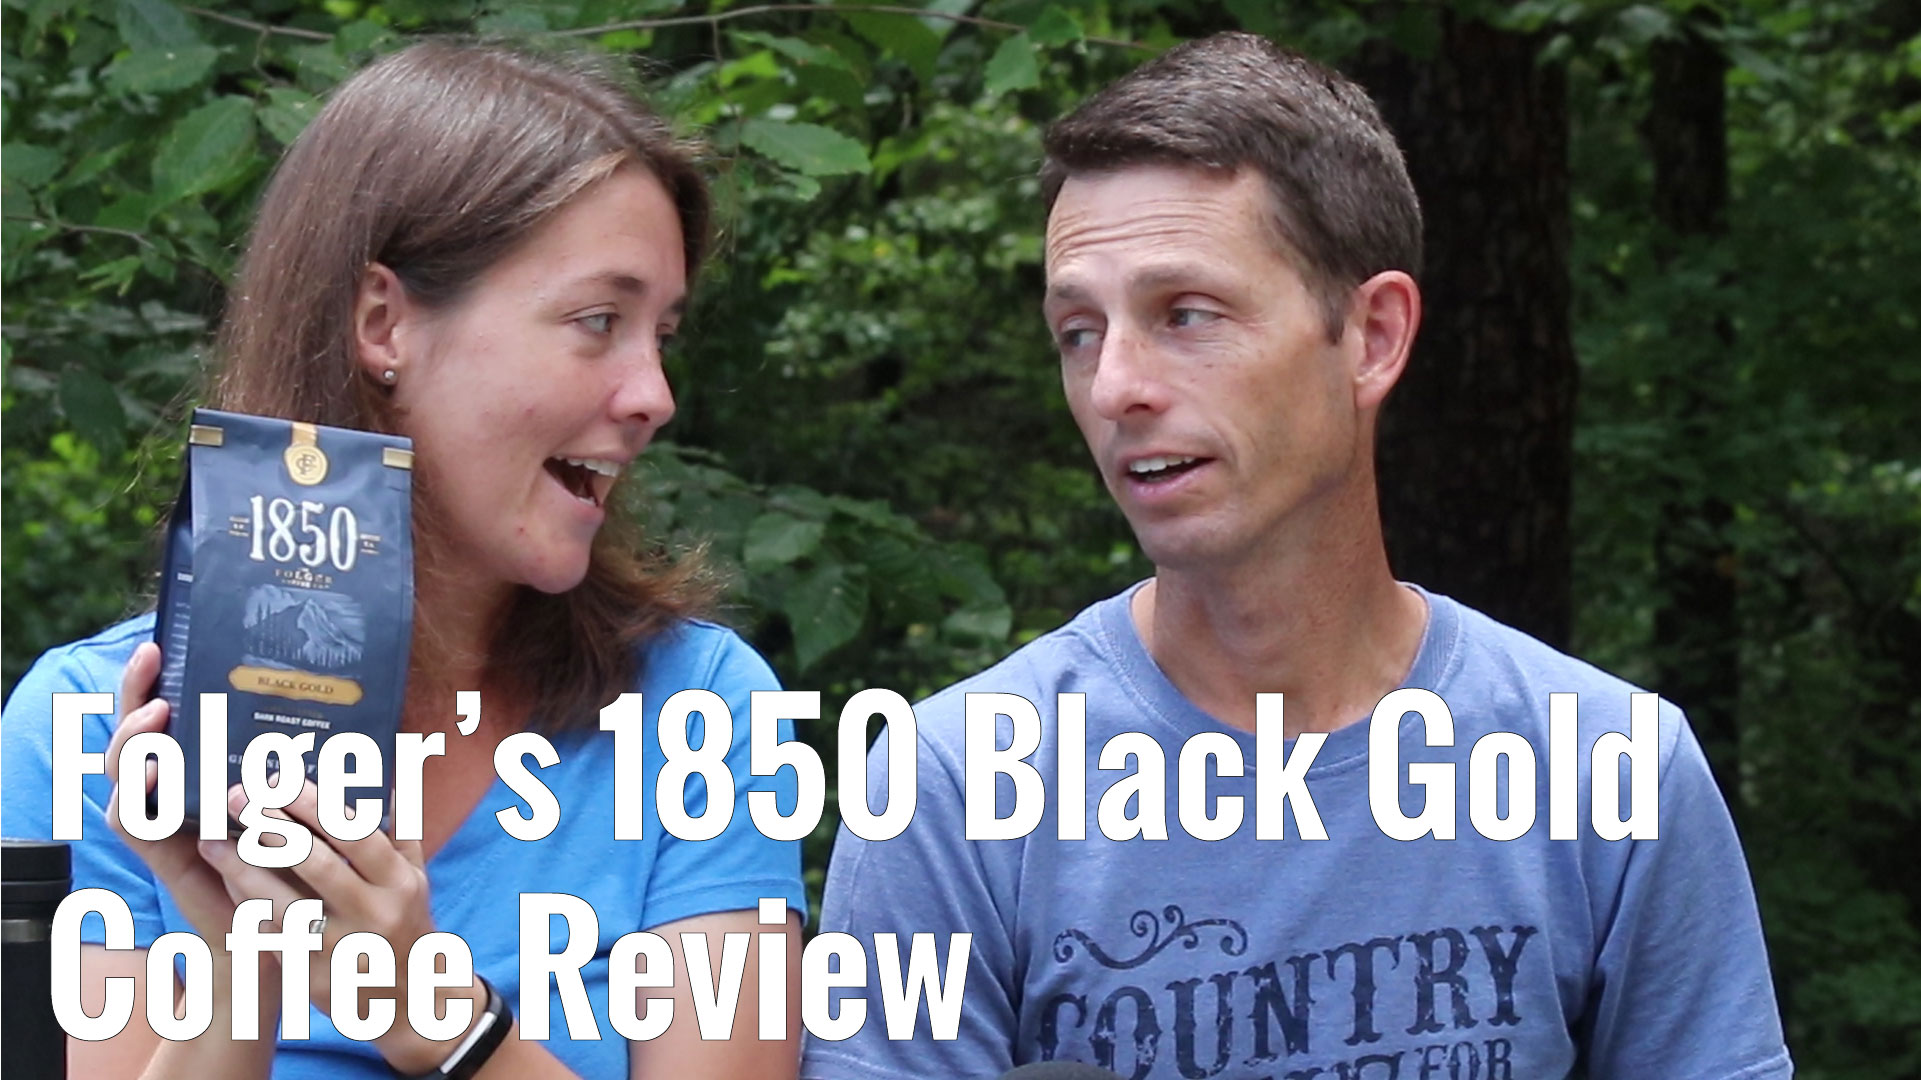 Video thumbnail for the review of Folgers 1850 Black Gold coffee.